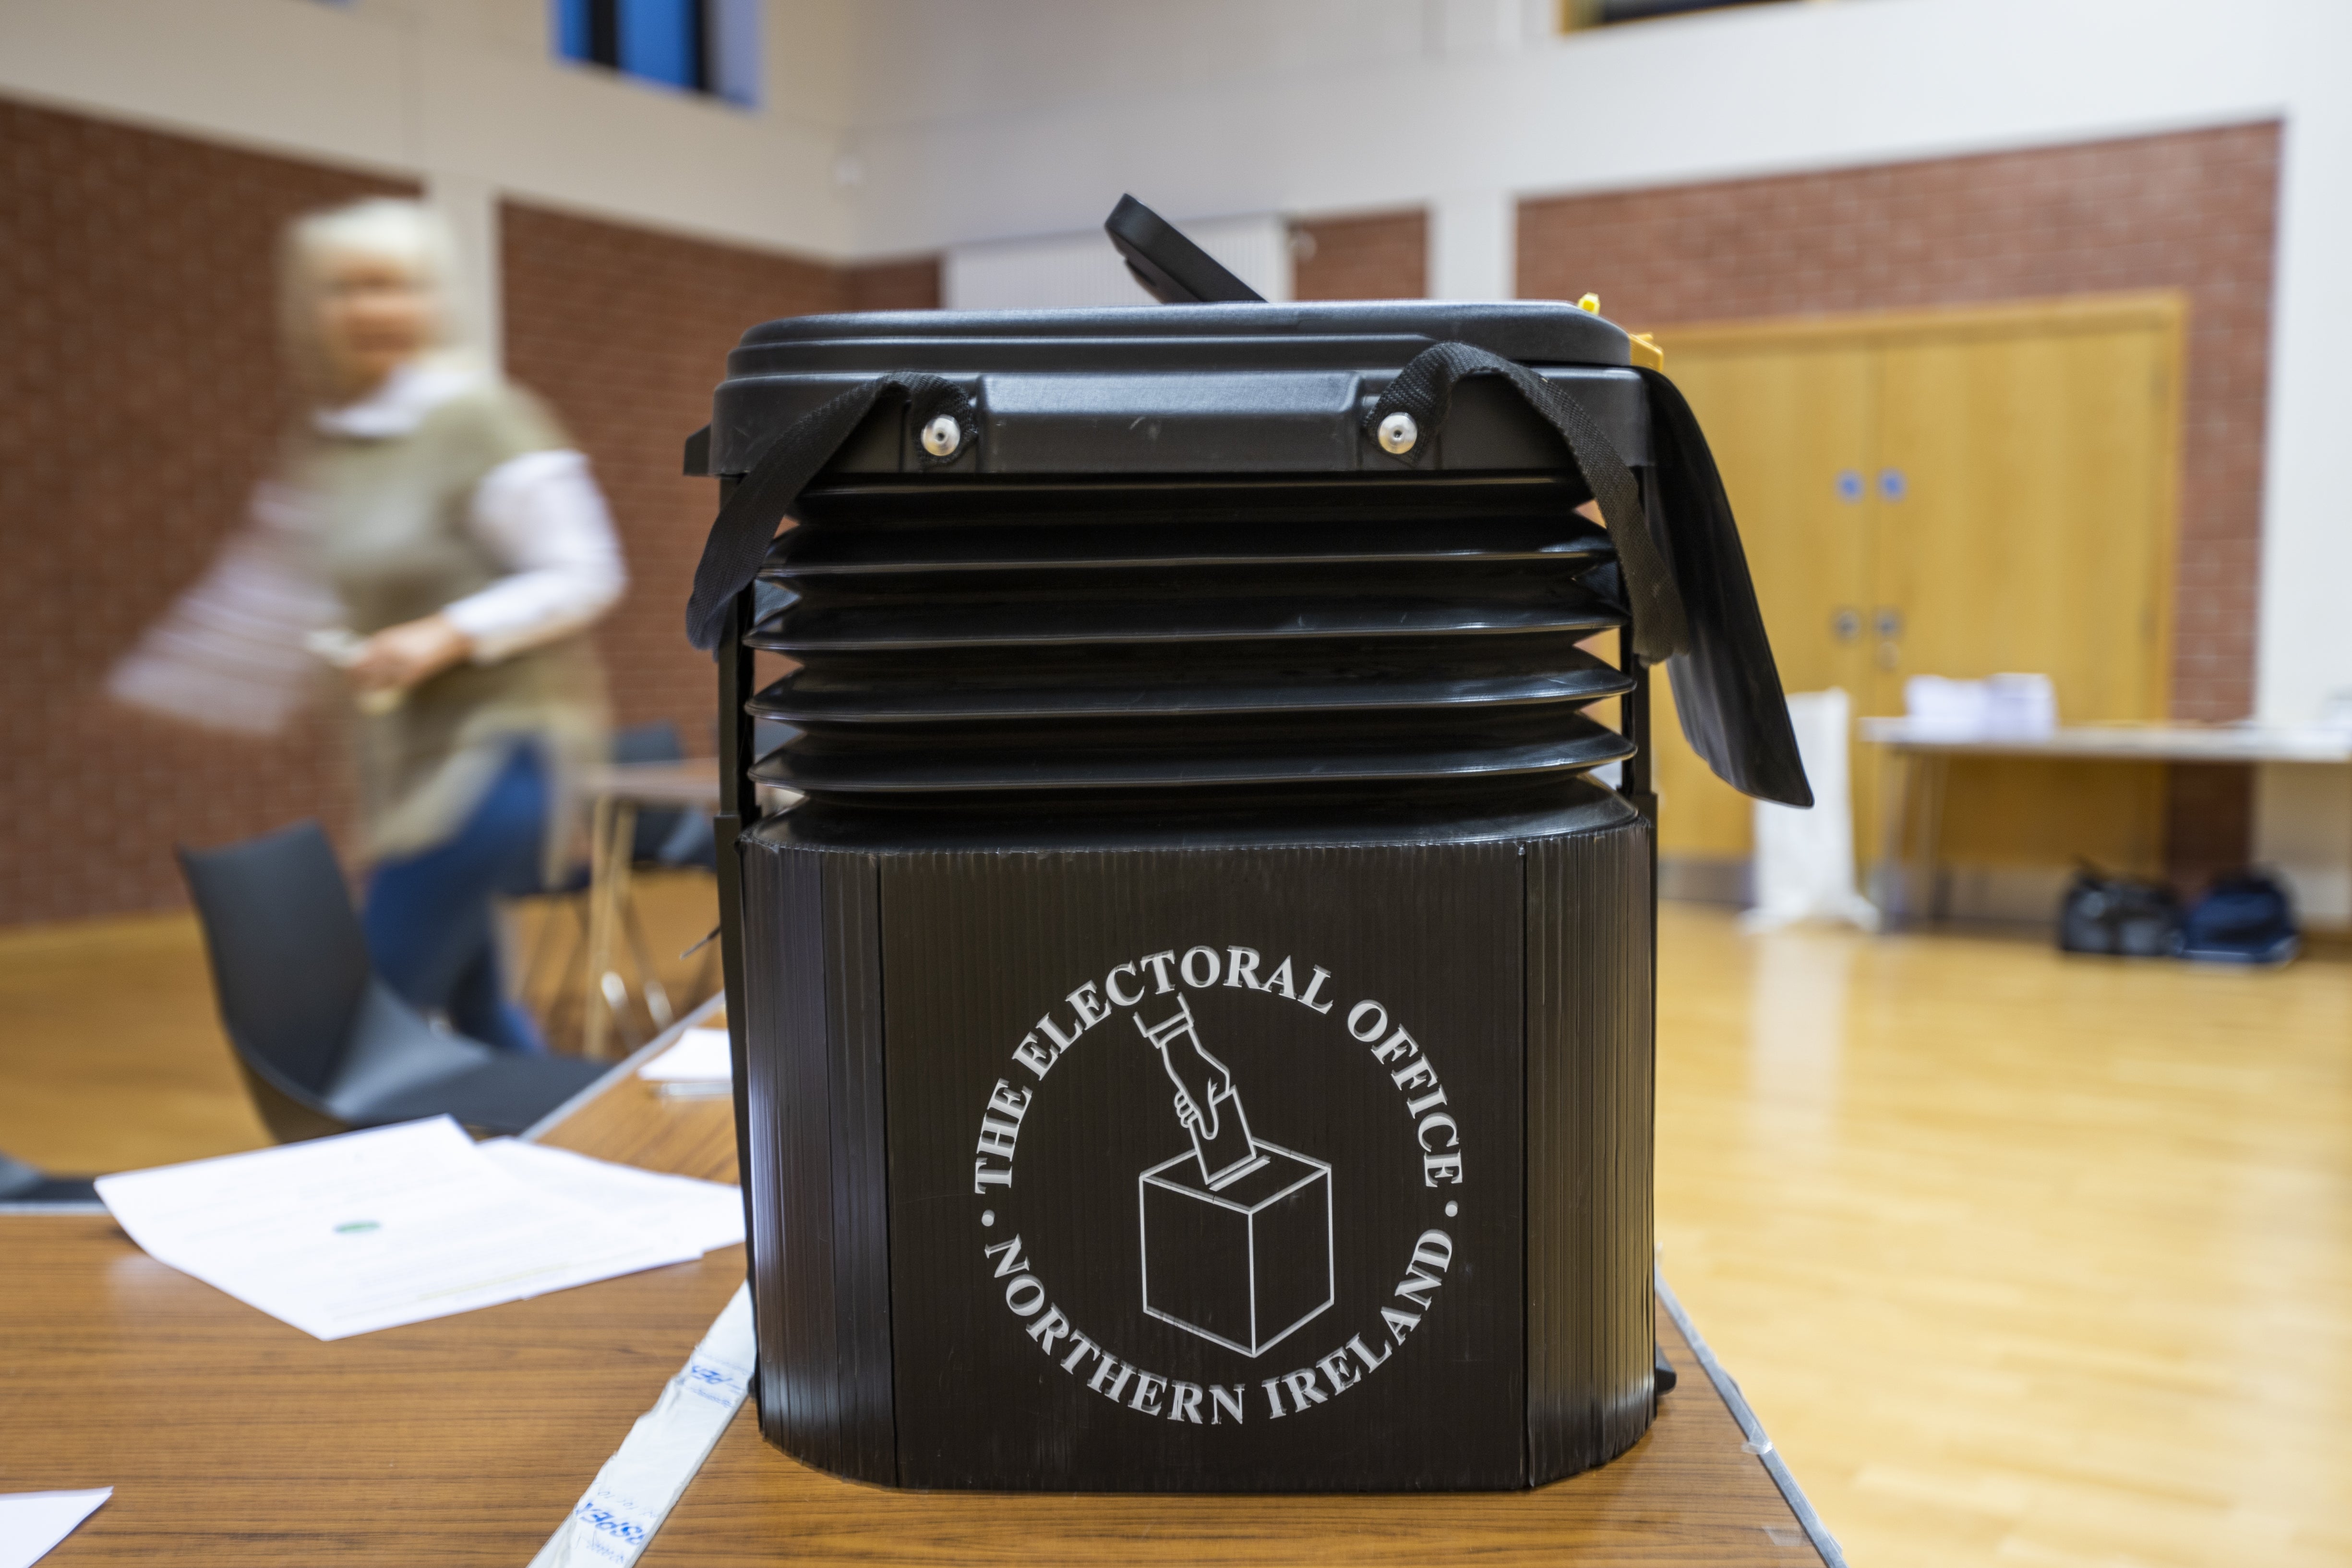 The counting of votes in a fresh Stormont Assembly election will start at 8am on Friday. (Liam McBurney/PA)